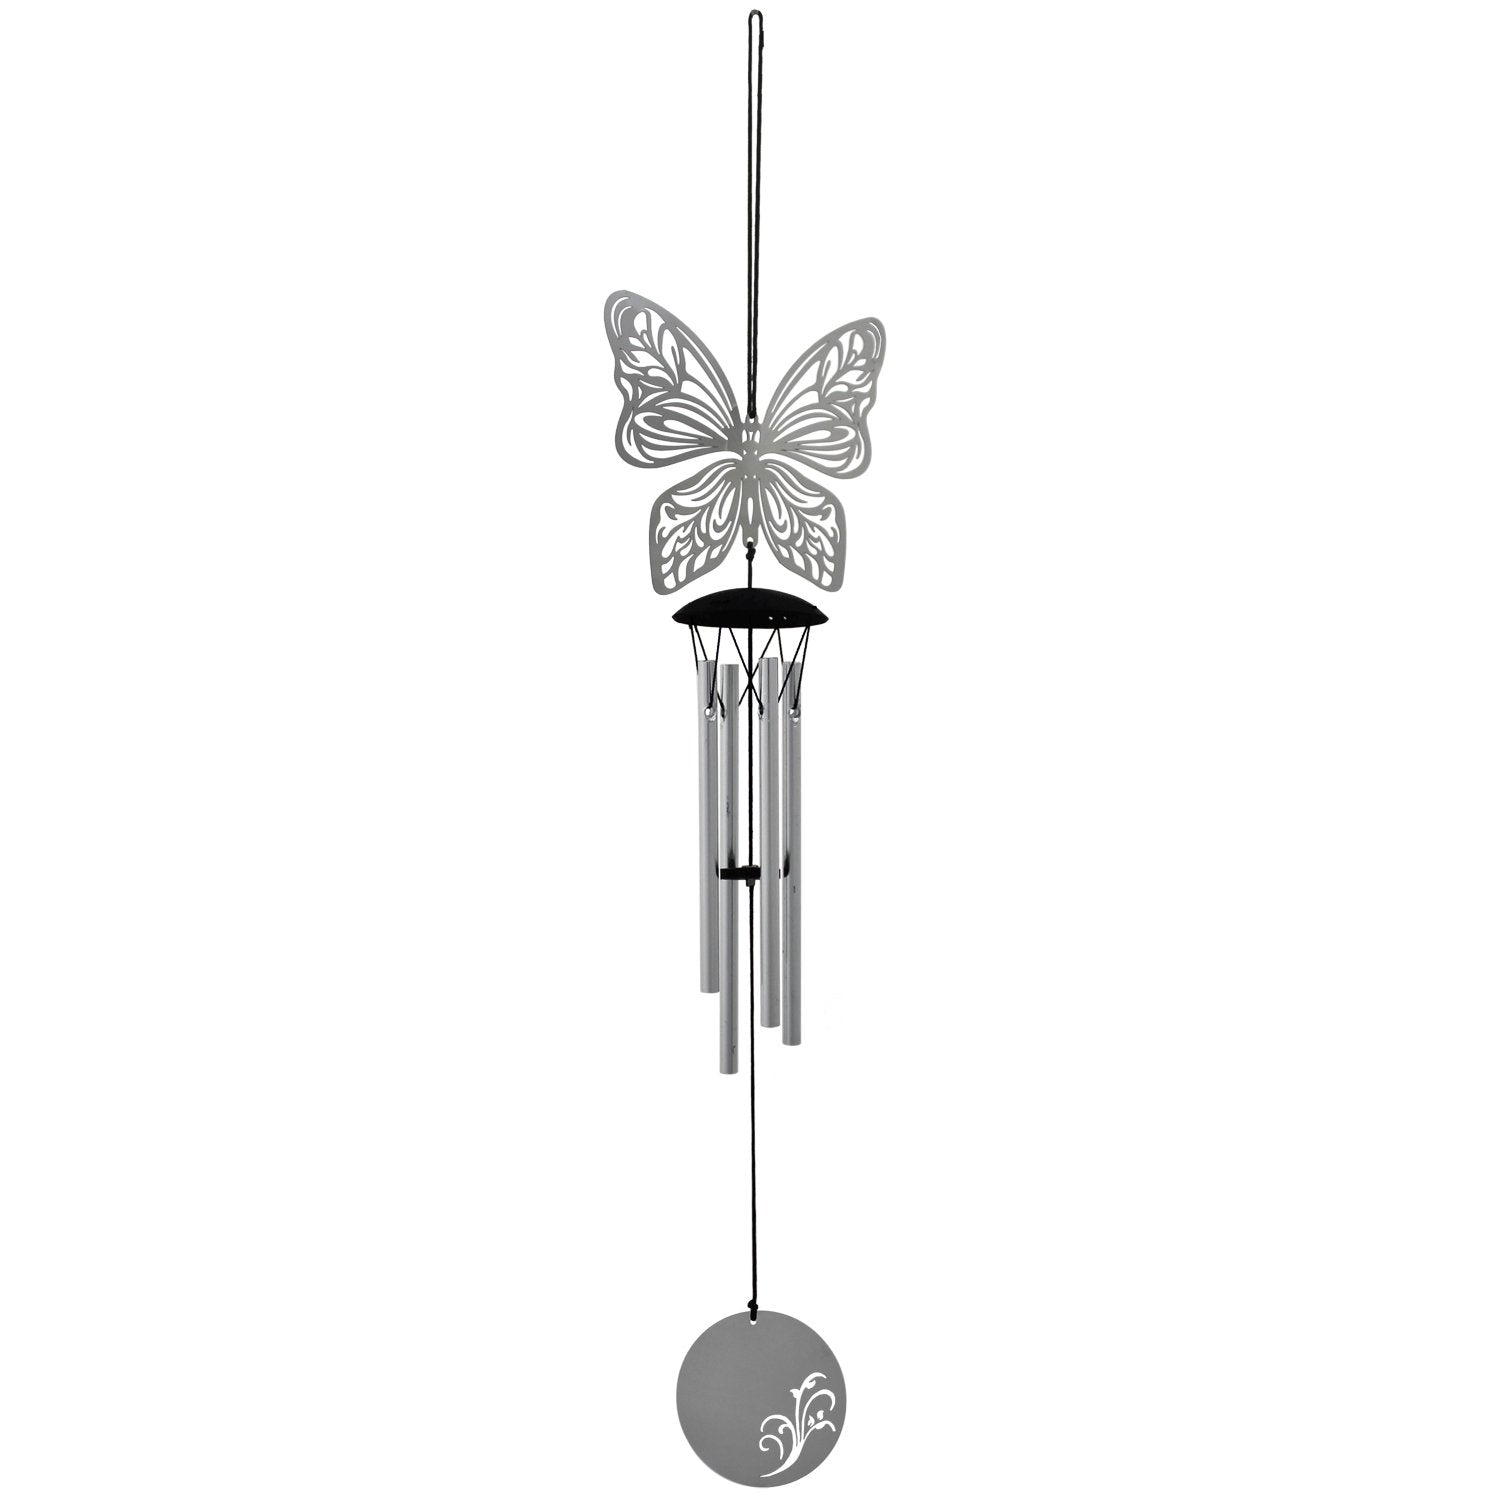 Flourish Chime - Butterfly full product image